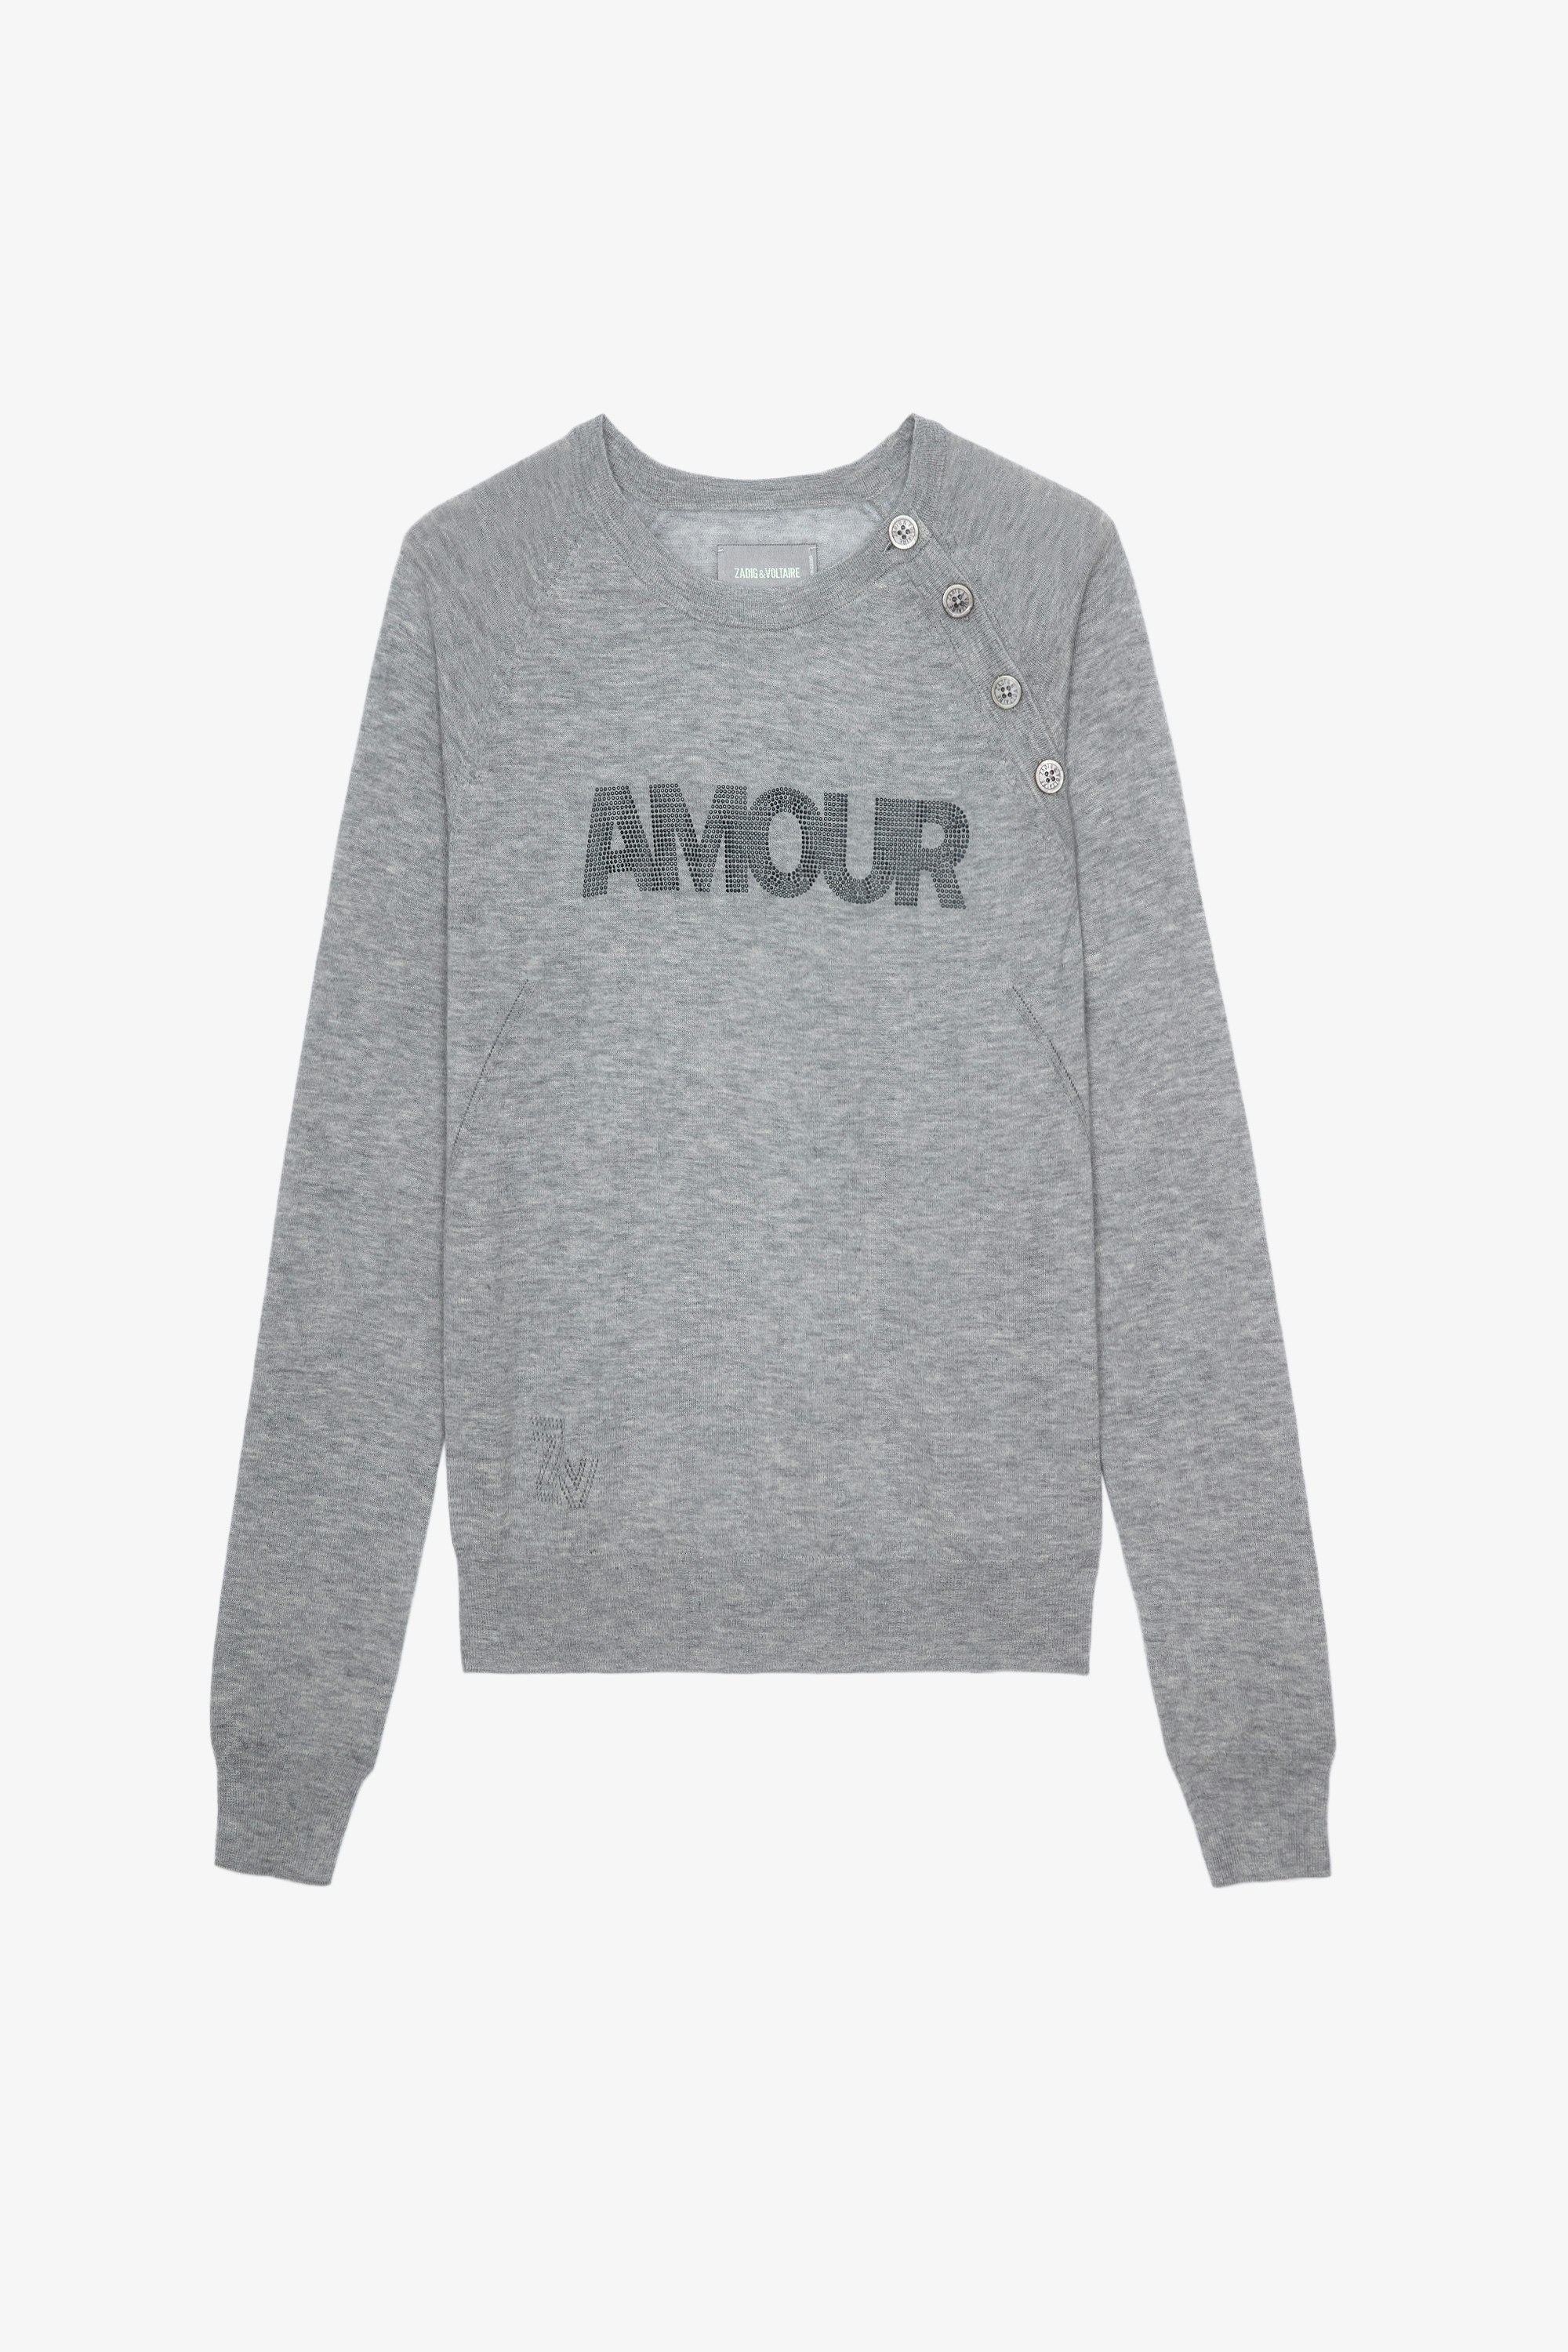 Regliss Cashmere Jumper Women’s grey cashmere jumper with “Amour” slogan and button detailing